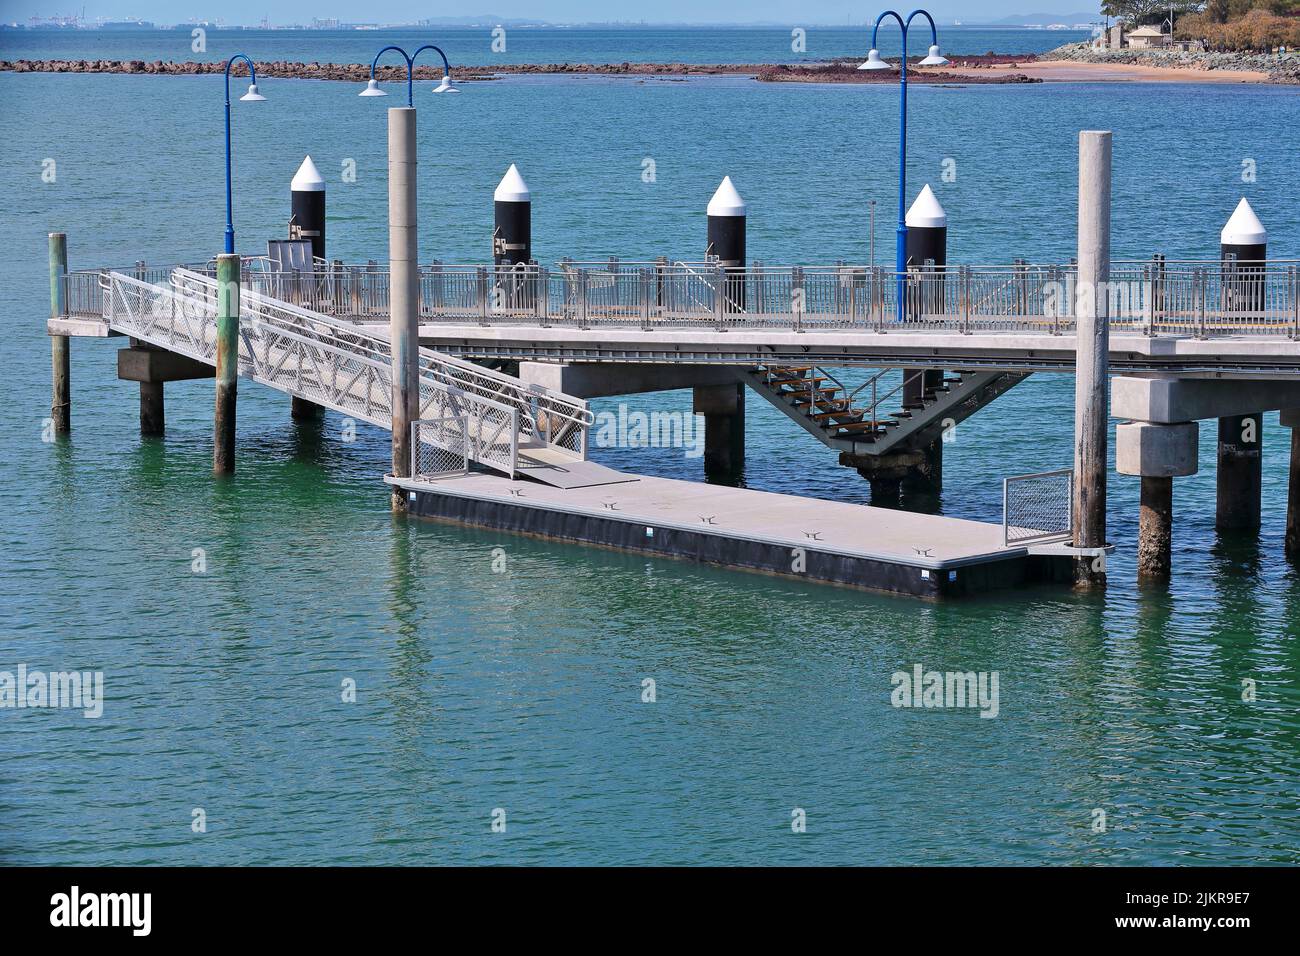 116 Floating pontoons at the Redcliffe Jetty head sheltered by a breakwater. Queensland-Australia. Stock Photo